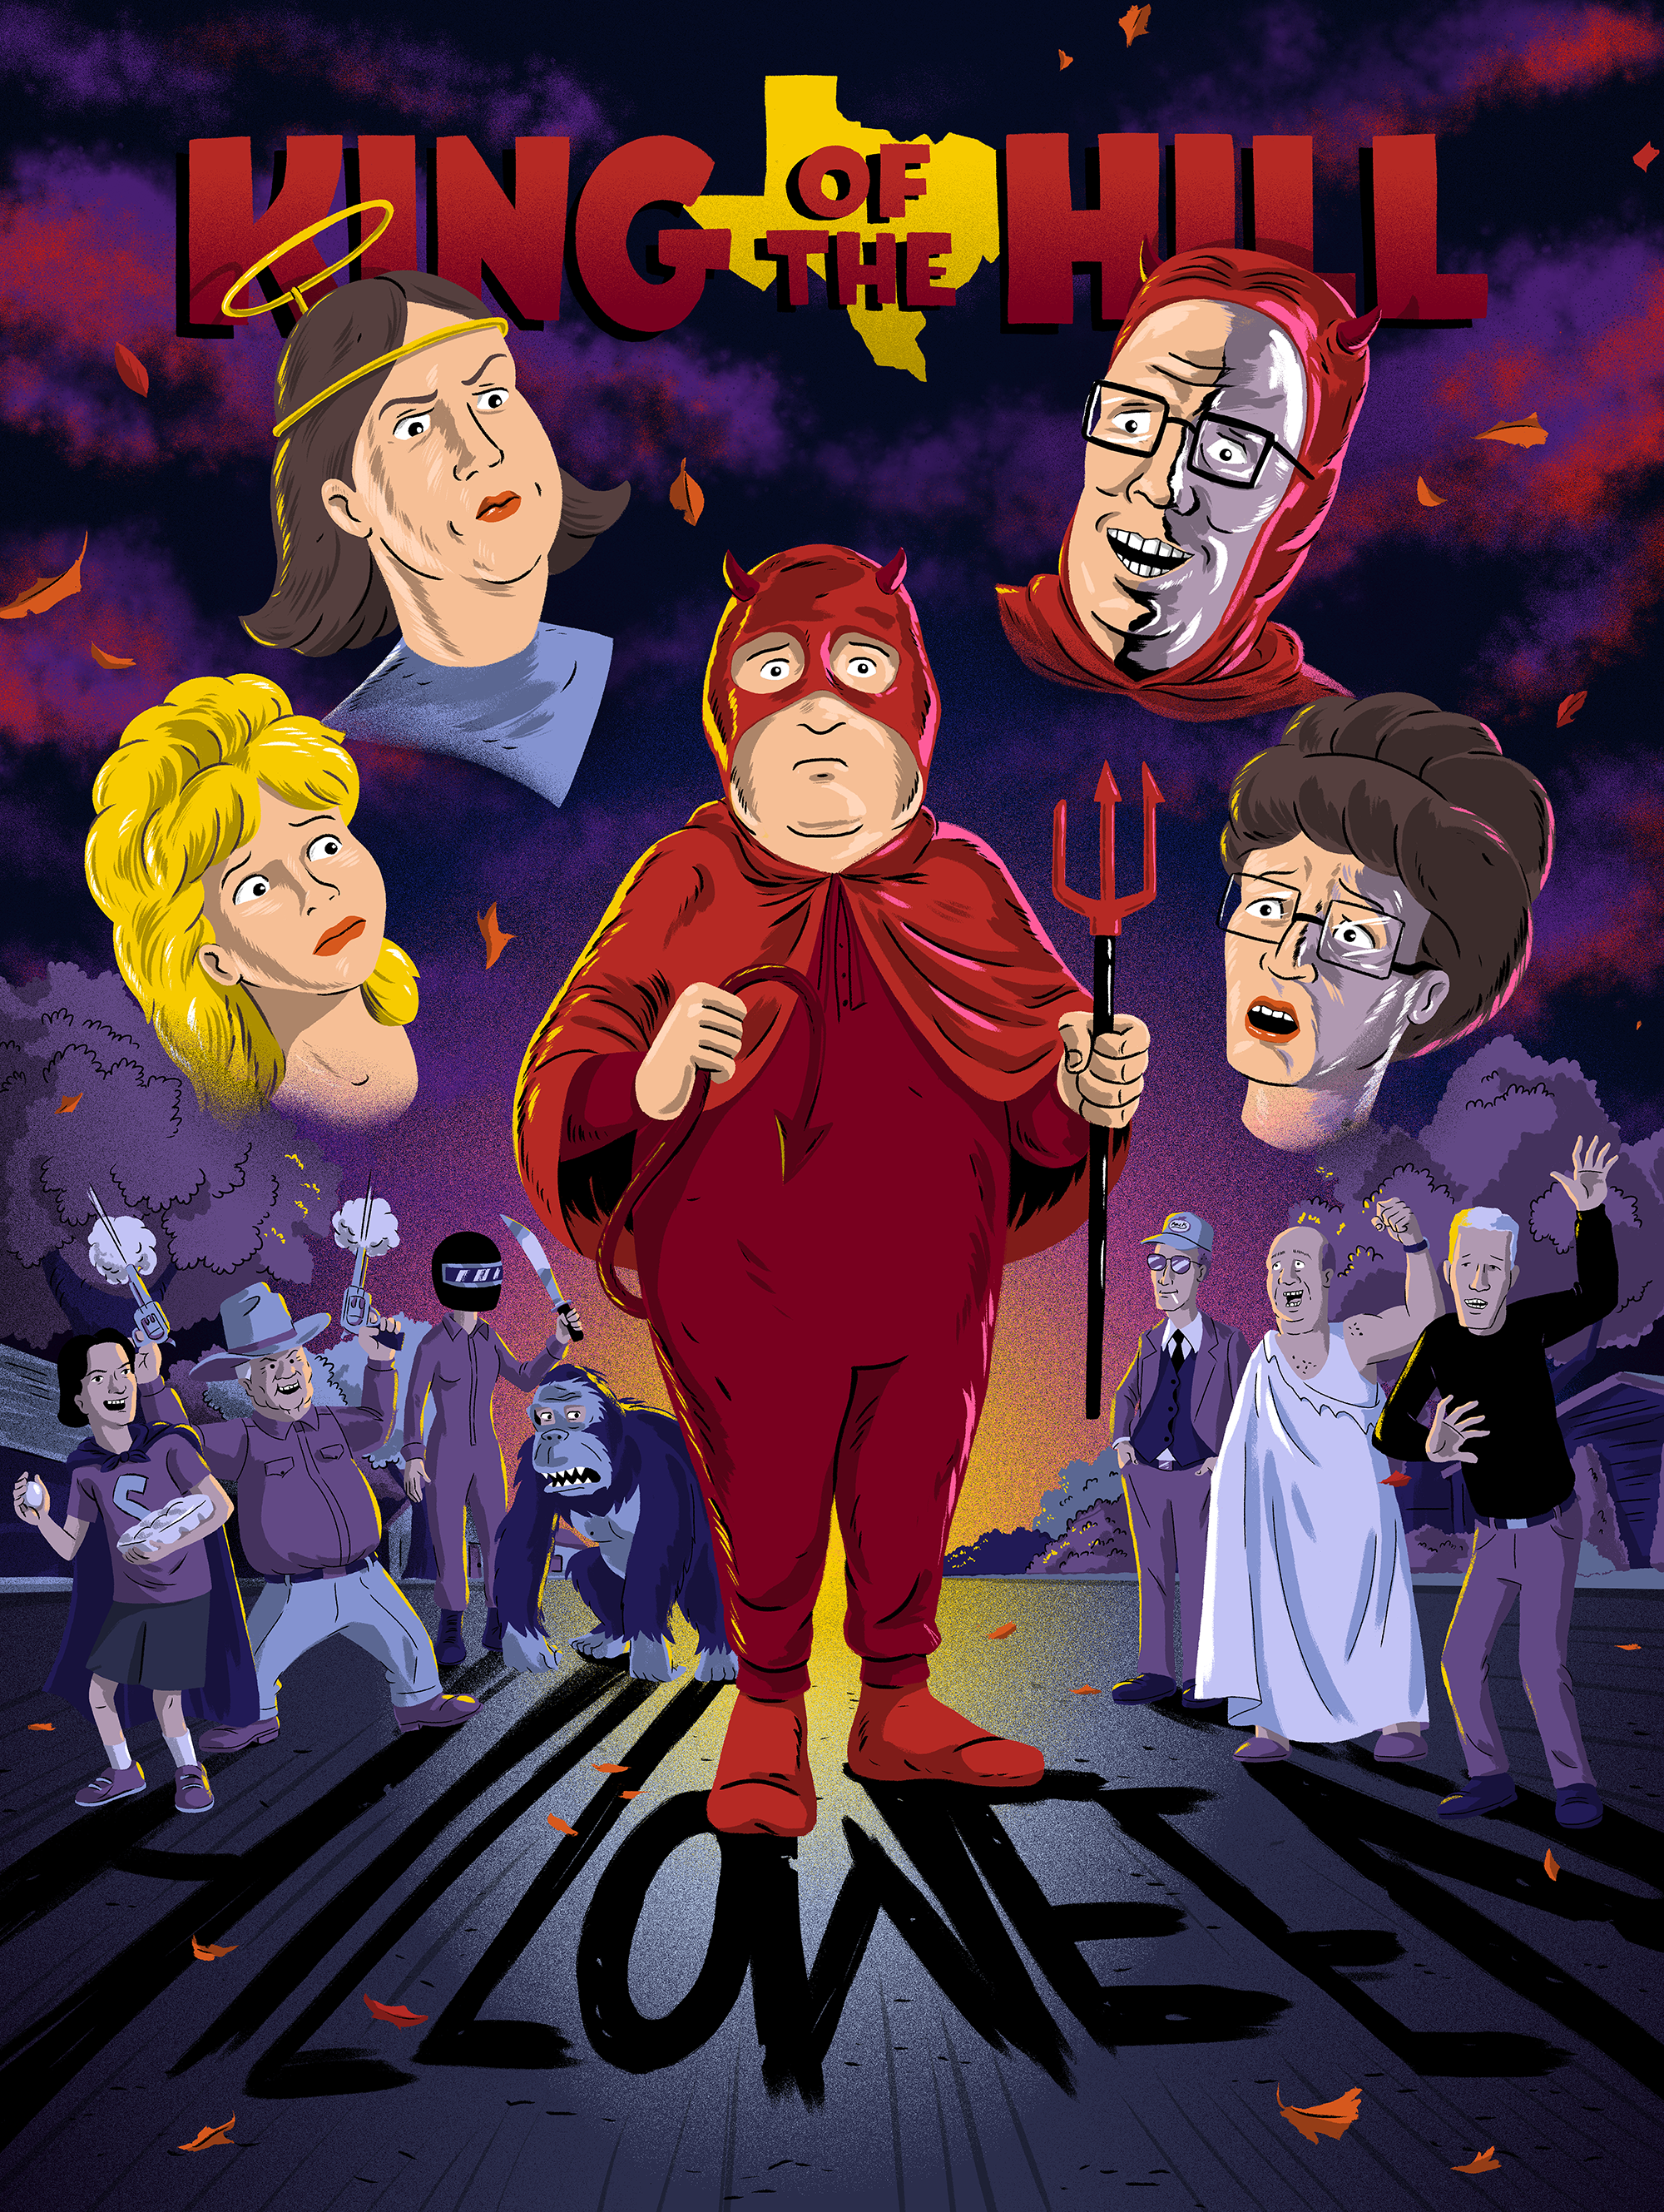 King of the Hill Hilloween Poster by Bill Galvan and JJ Harrison.